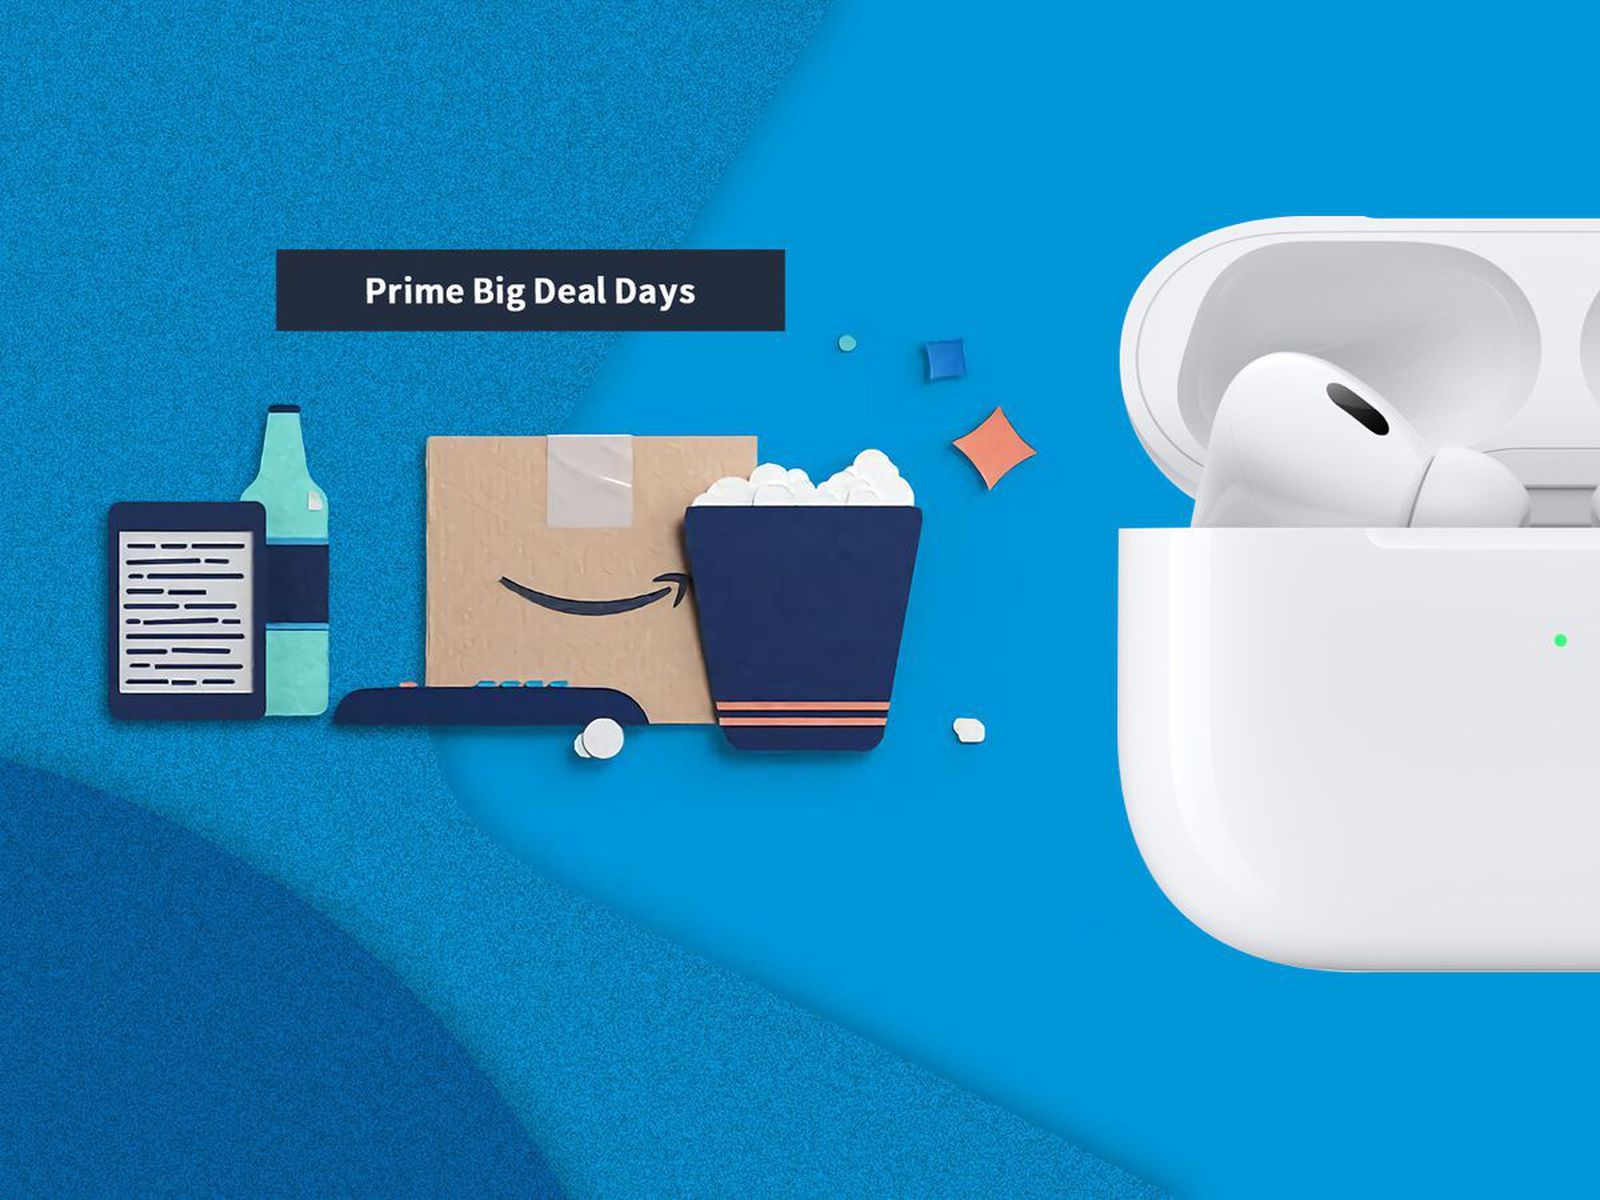 AirPods Pro, iPad, Fire Stick and More: Get These Prime Day Deals